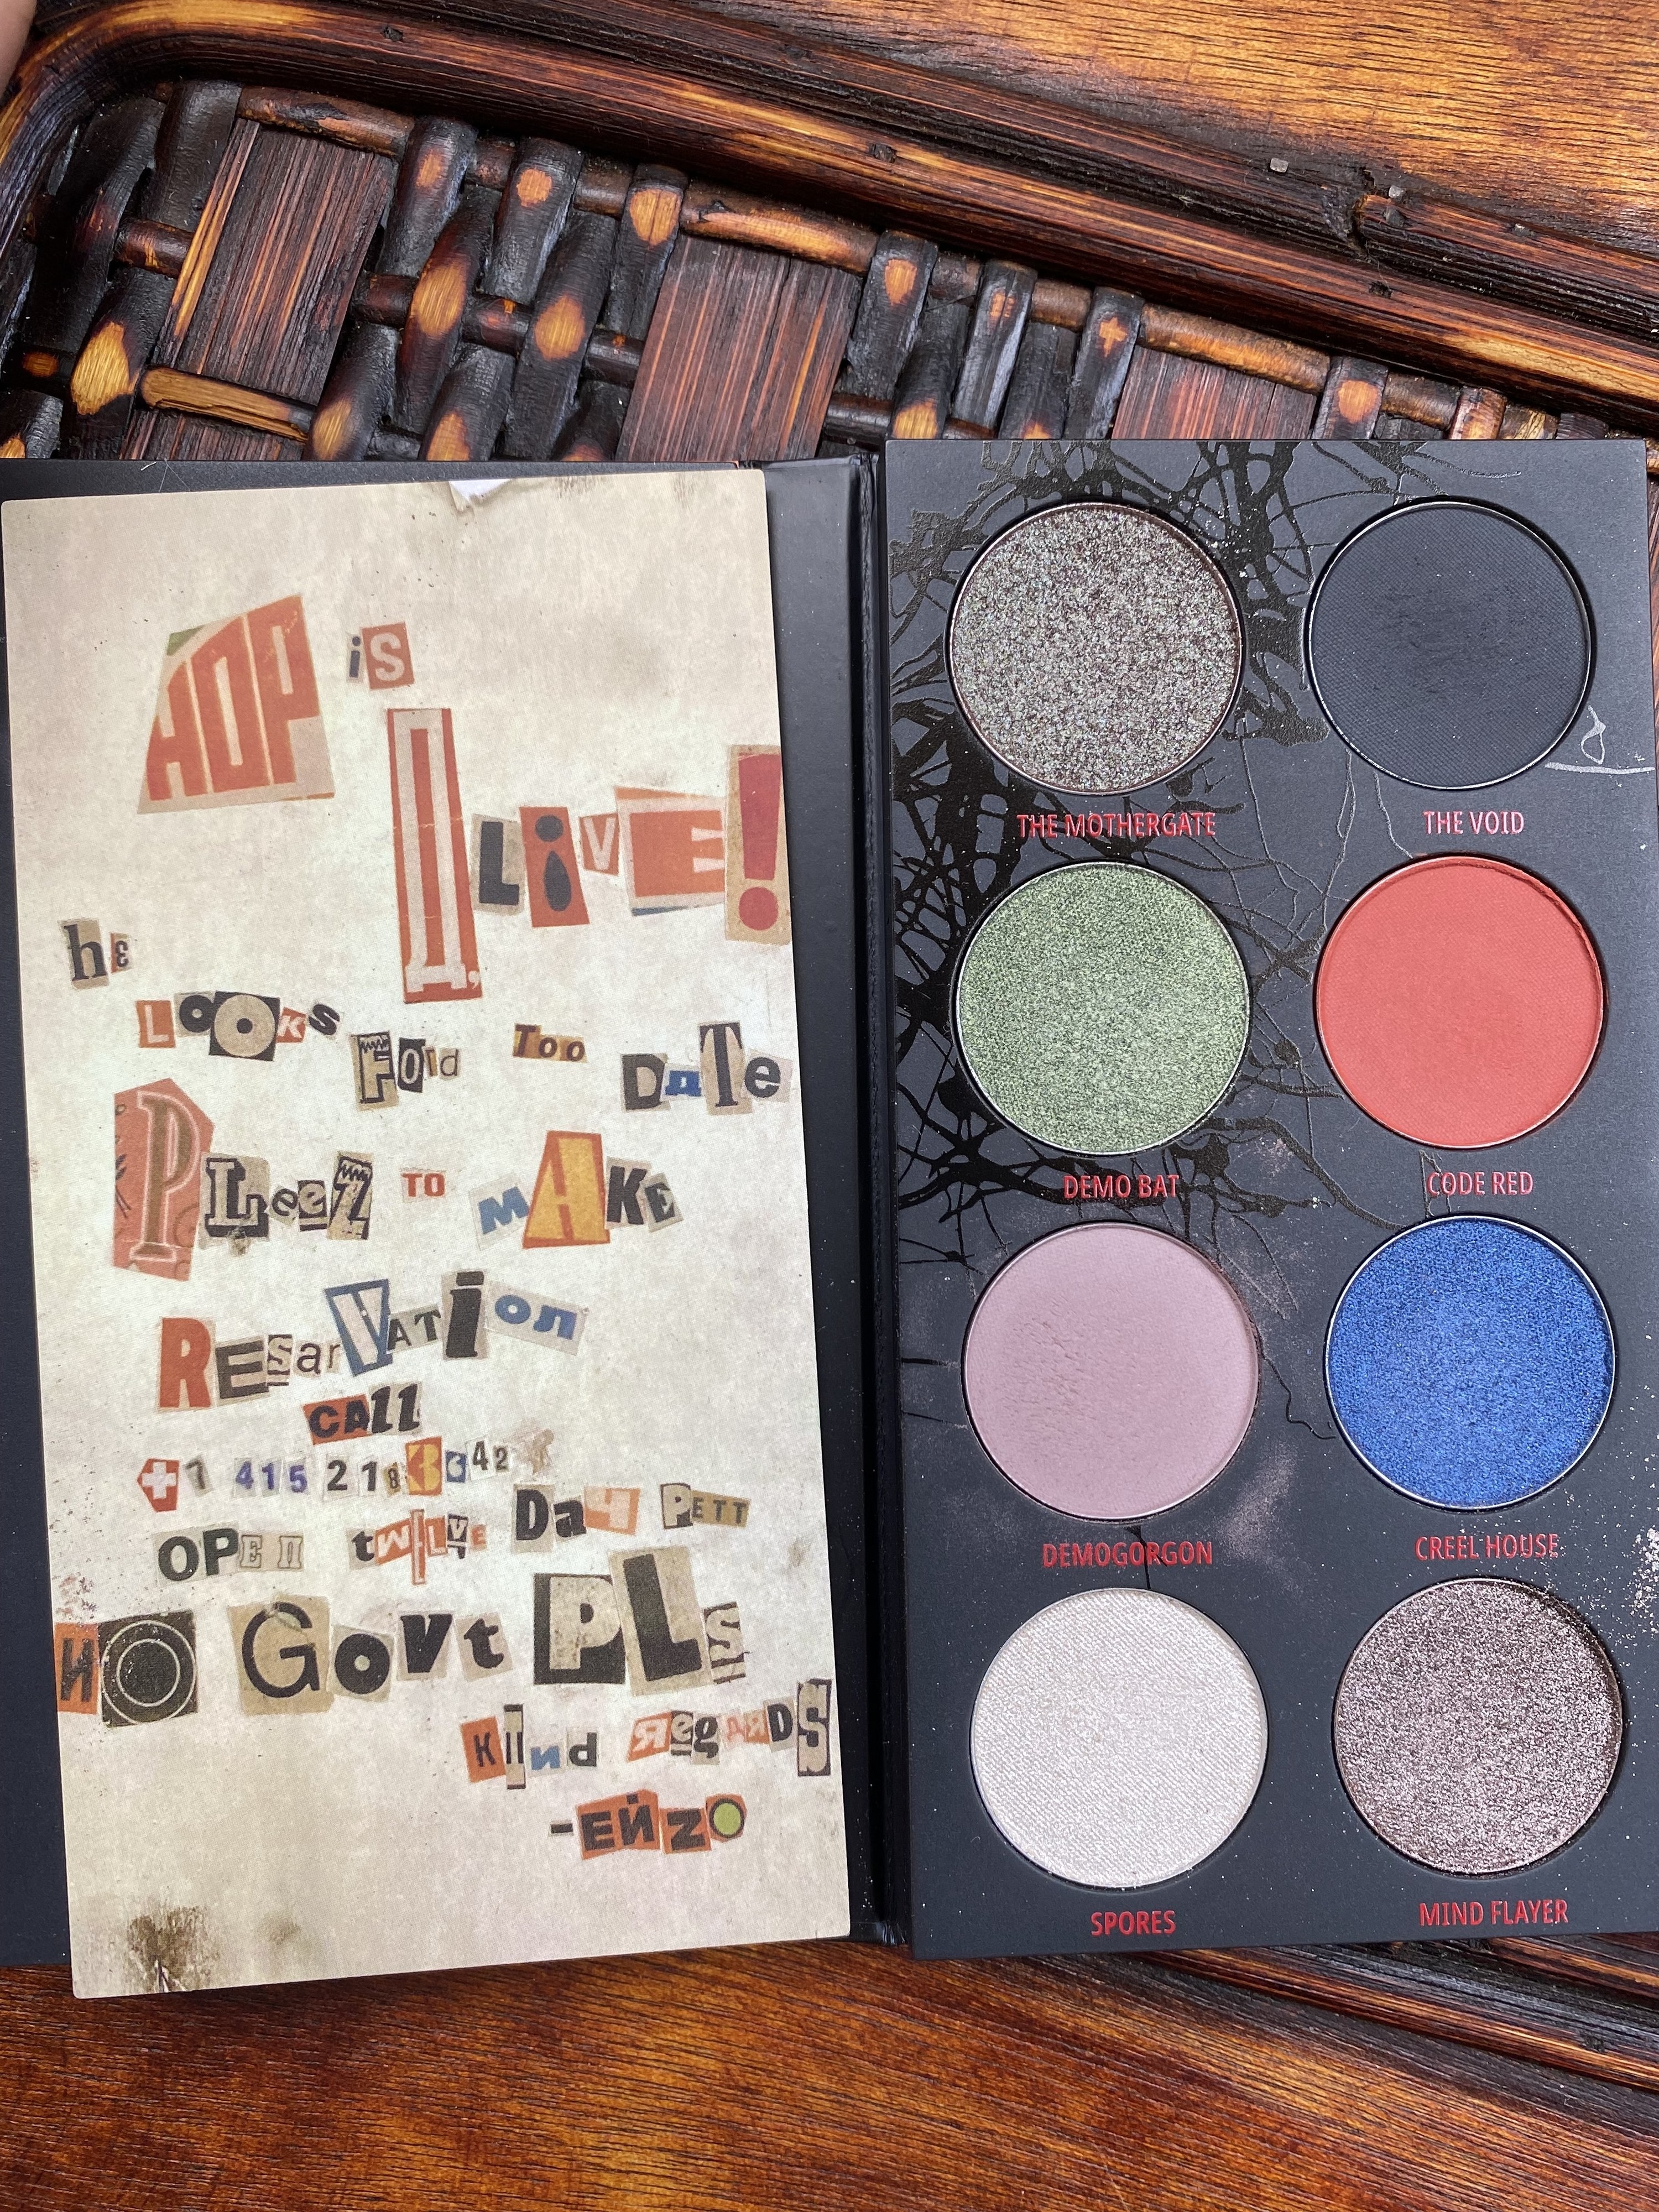 The Upside Down palette